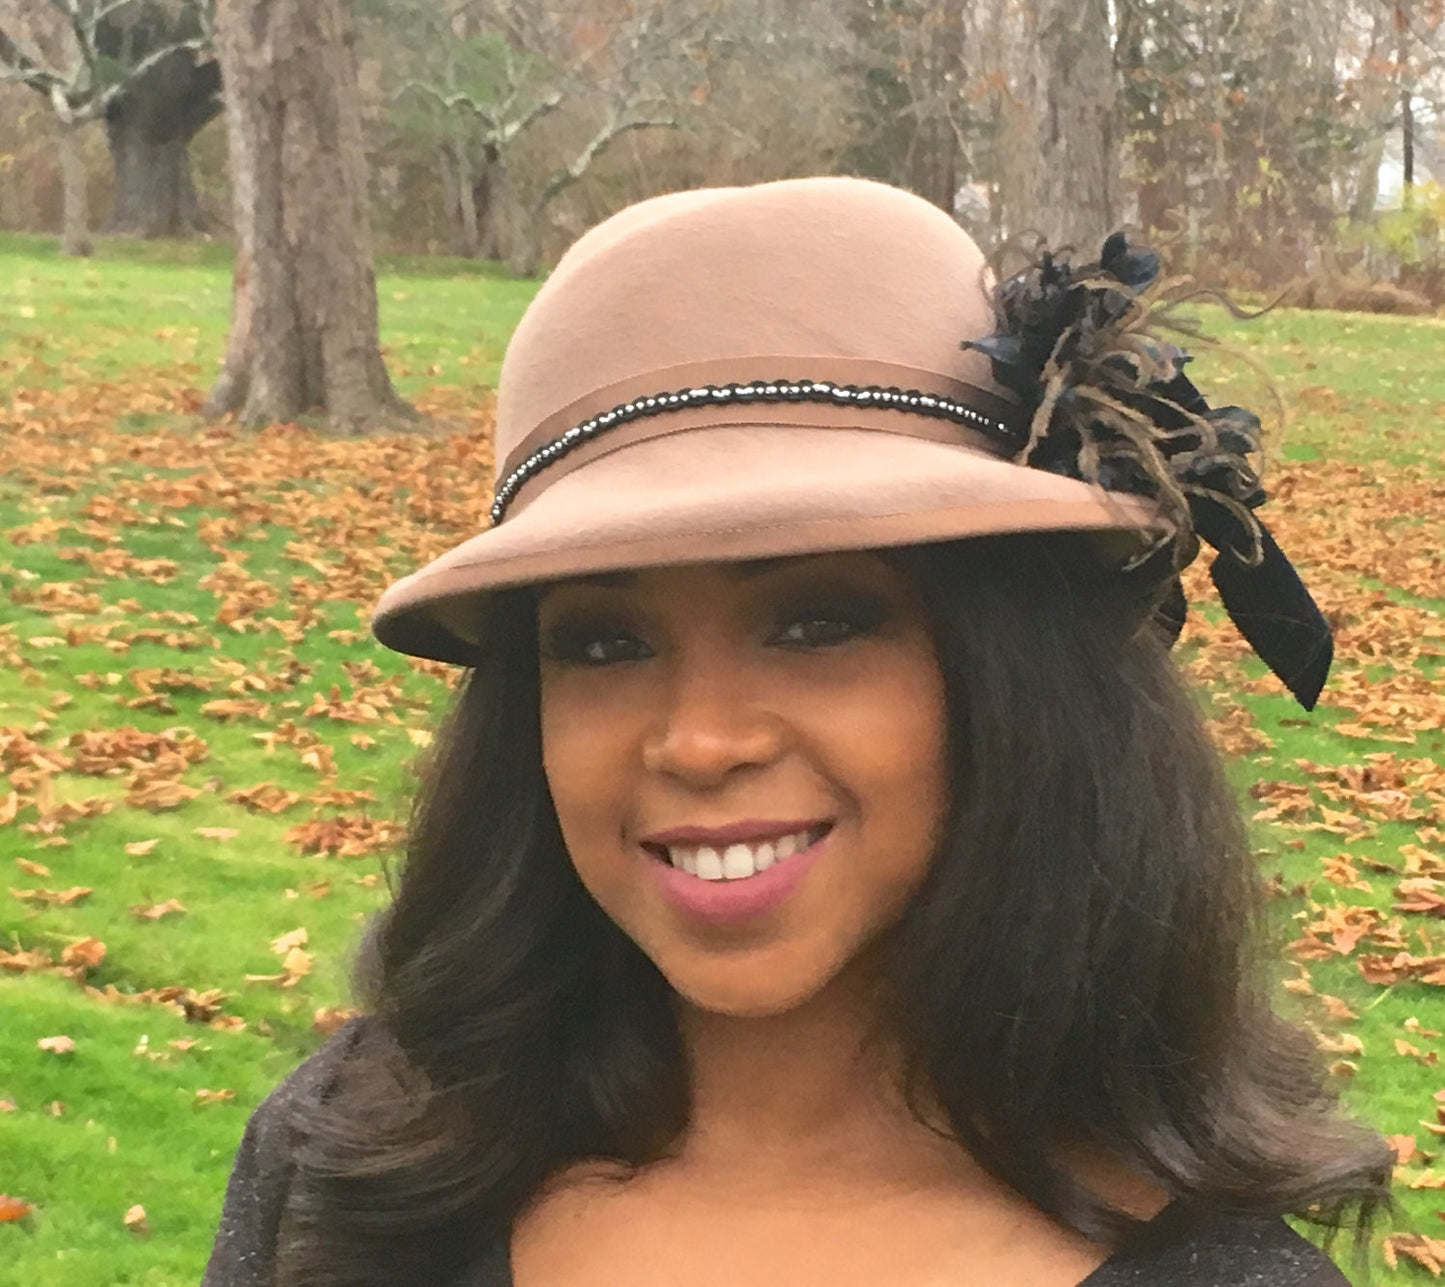 Tan Wool Felt Fedora Style Hat with Black Trim and Ostrich Feathers-Silver bead Trim on Band-Black Velvet Ribbon Bow-Church Hat-Wedding! WOW